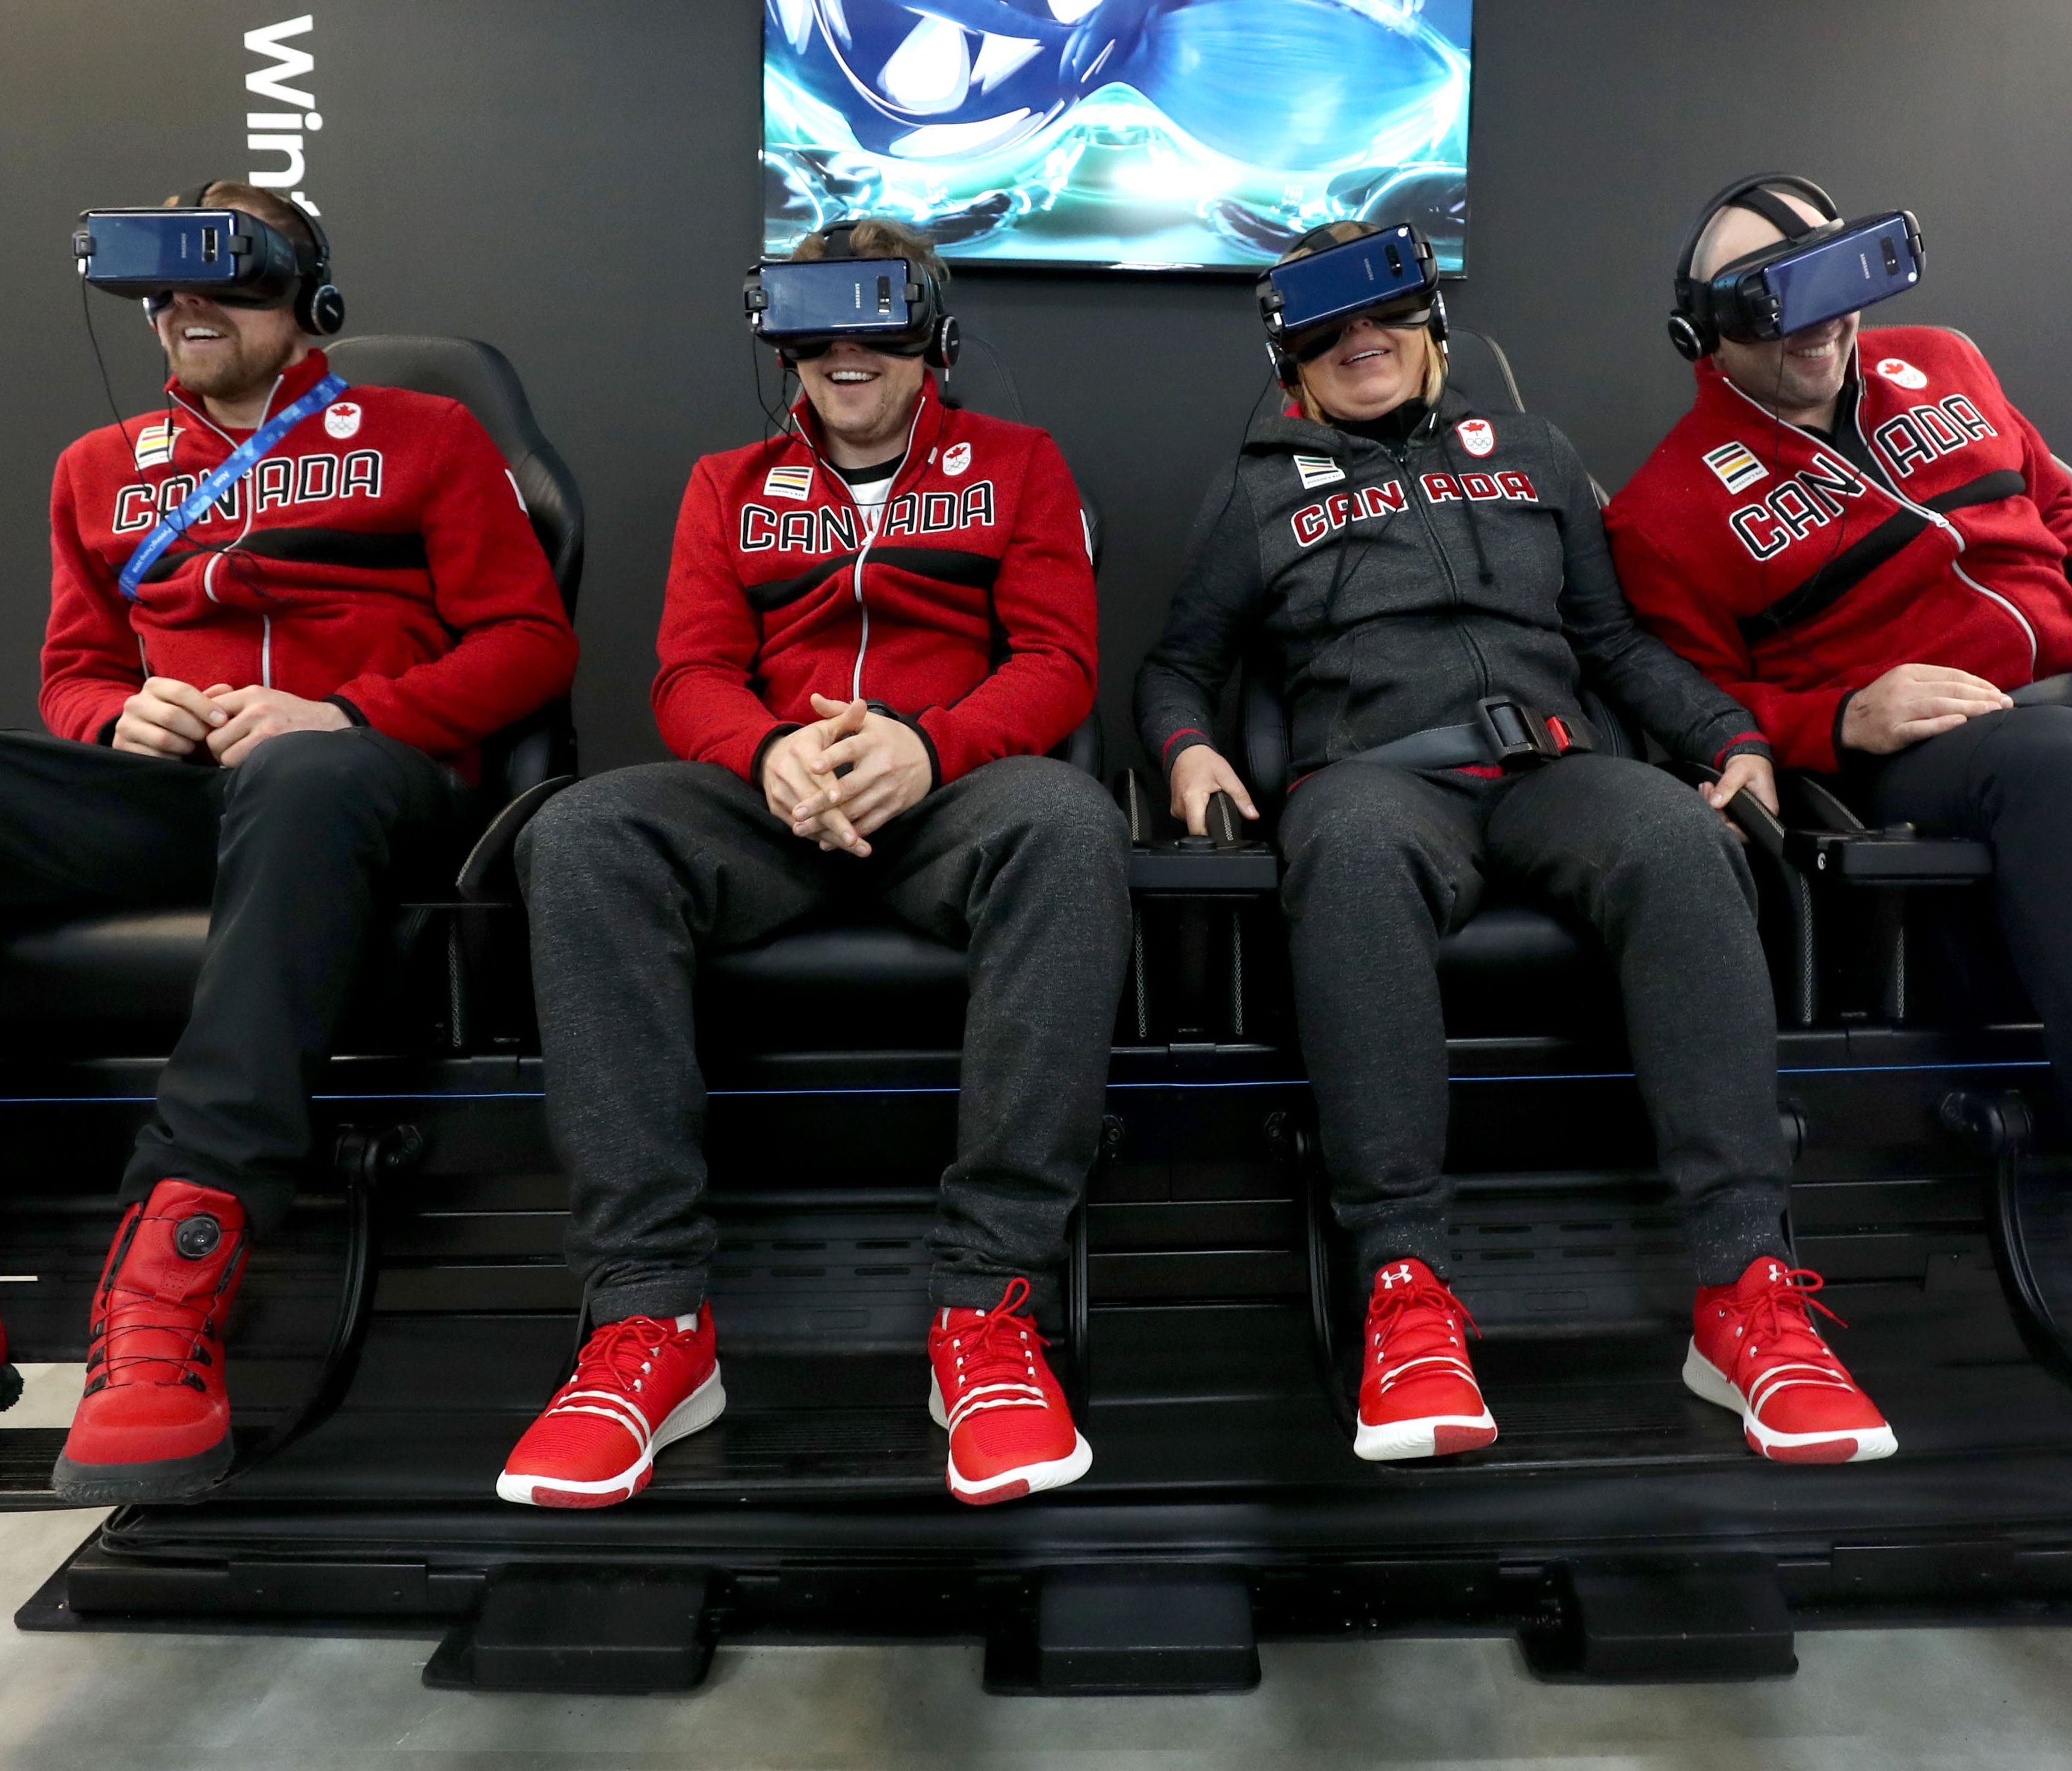 Members of Team Canada Olympic Men's Alpine skiing, Dustin Cook, left, Ben Thomsen, strength coach Agneta Platter and Manuel Osborne-Paradis, have fun on a Samsung Virtual Reality ride inside a shop located in the Plaza Zone at the Pyeongchang Olympi